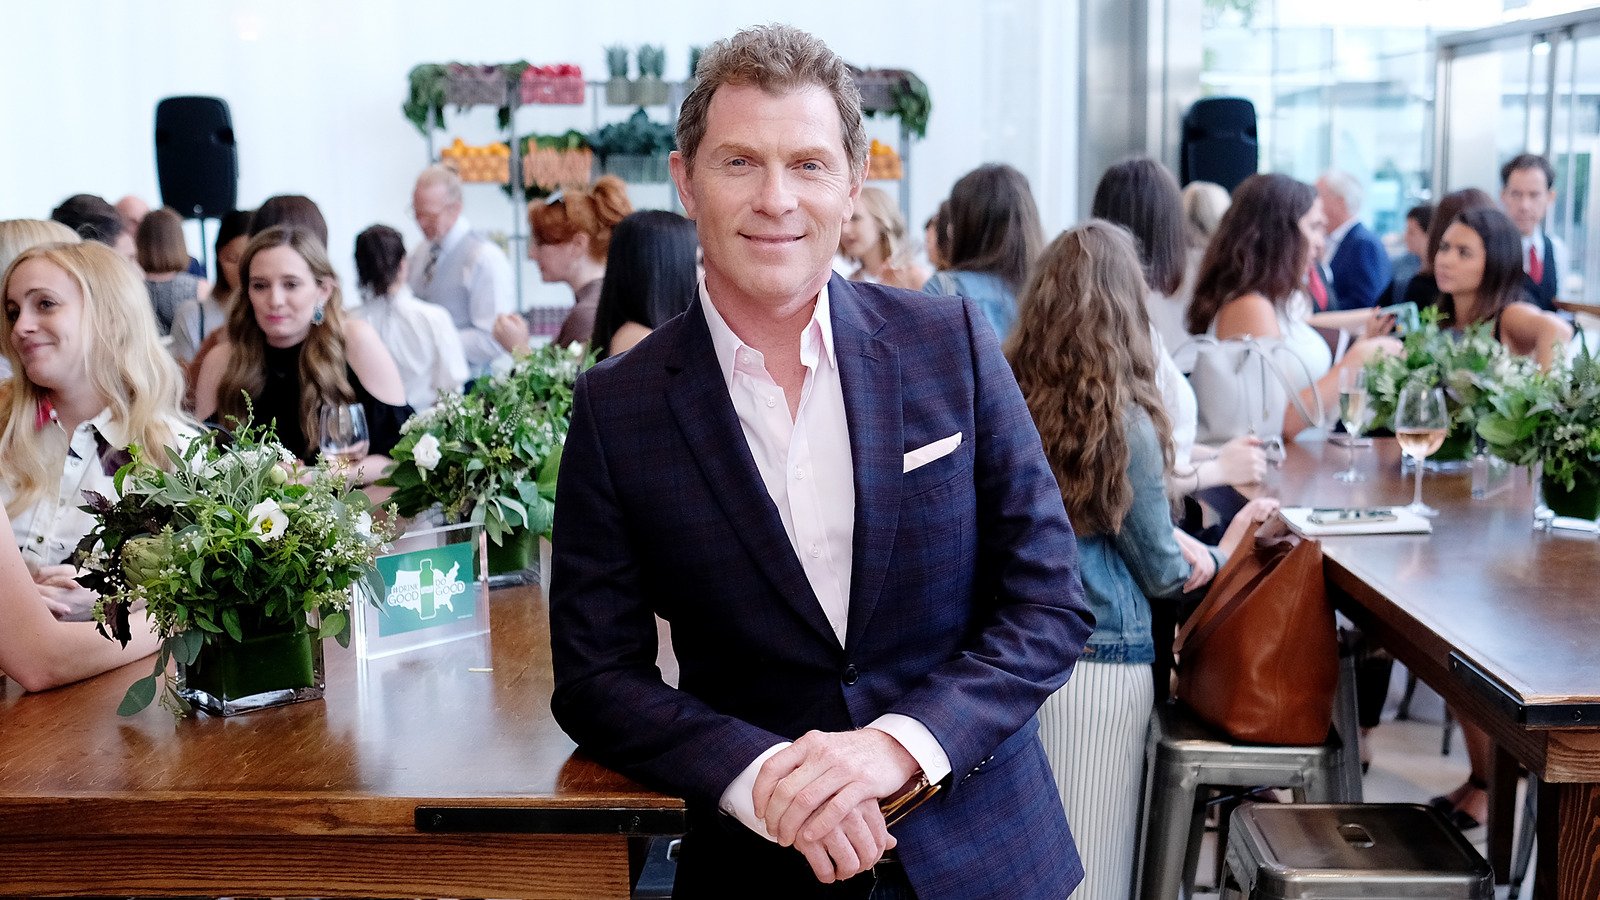 Bobby Flay's Transformation Is Really Causing A Stir